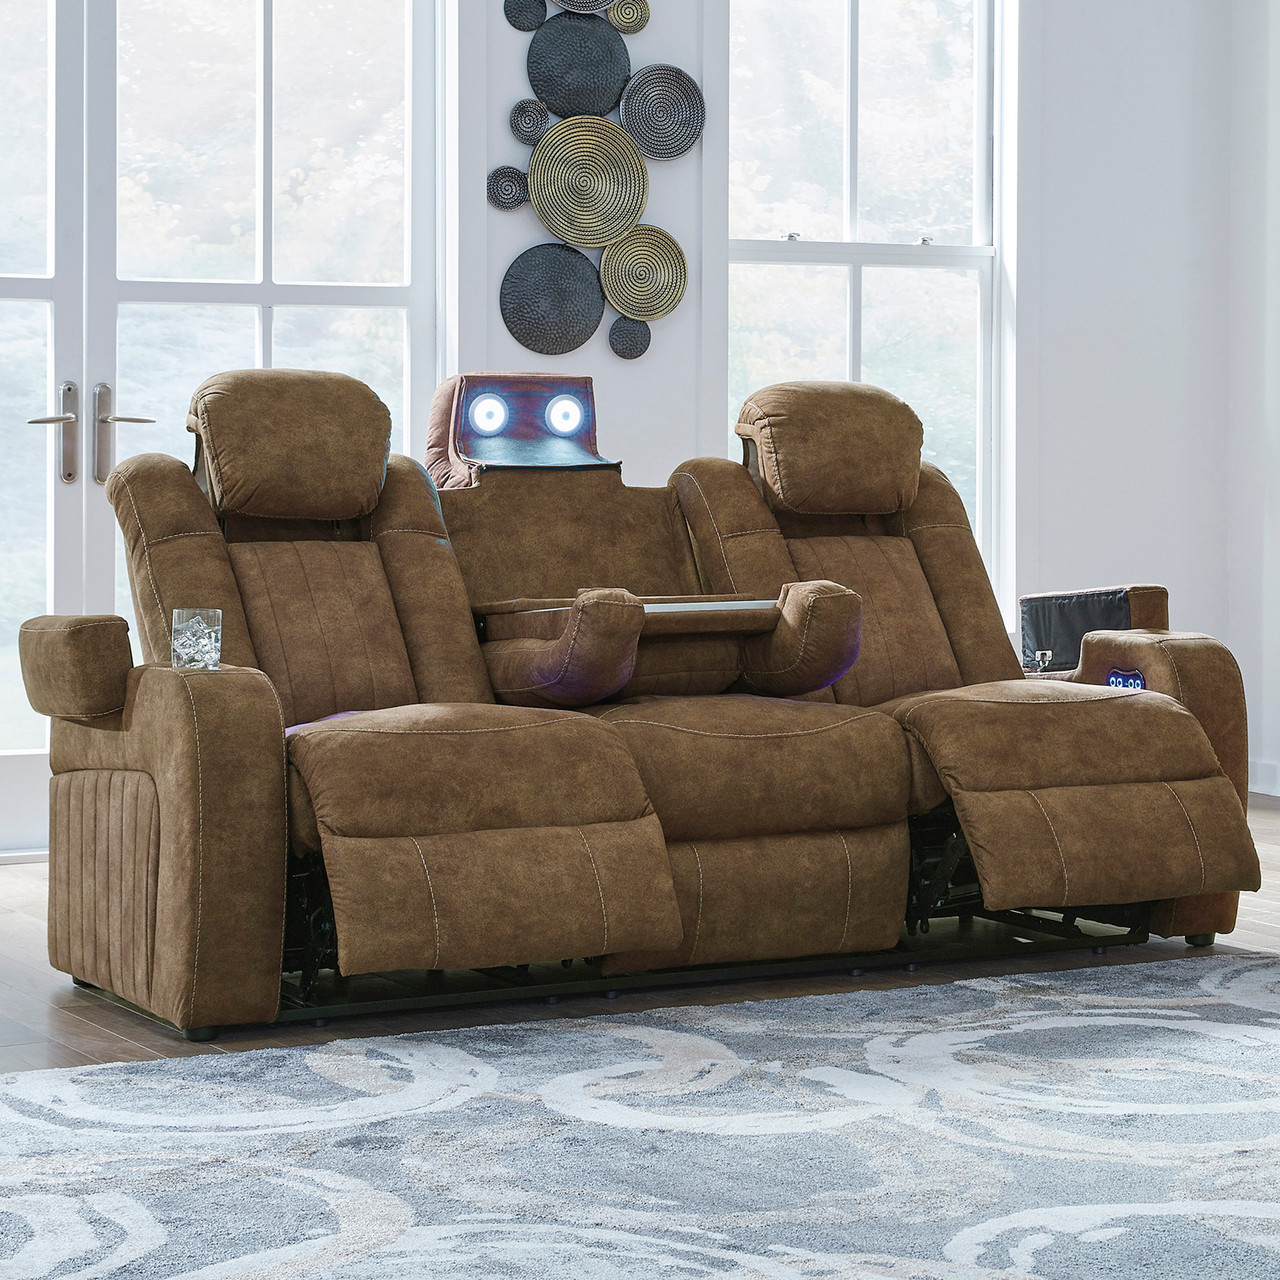 Phantom Sofa with Power Footrests  Sofa, Brown leather sofa, Foot